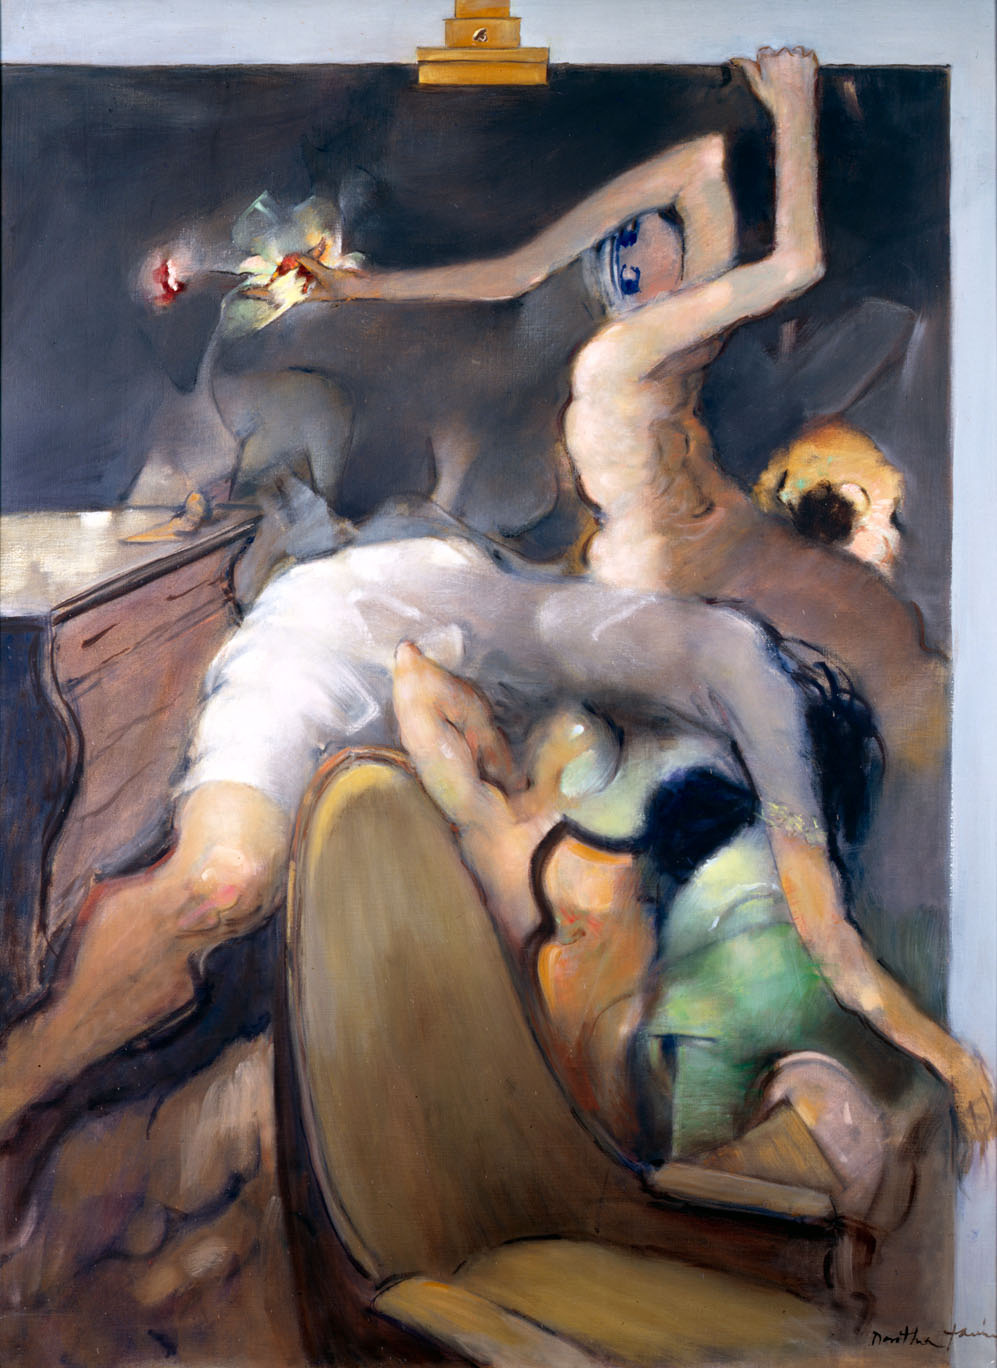 Dorothea Tanning. The Product (Daughter)